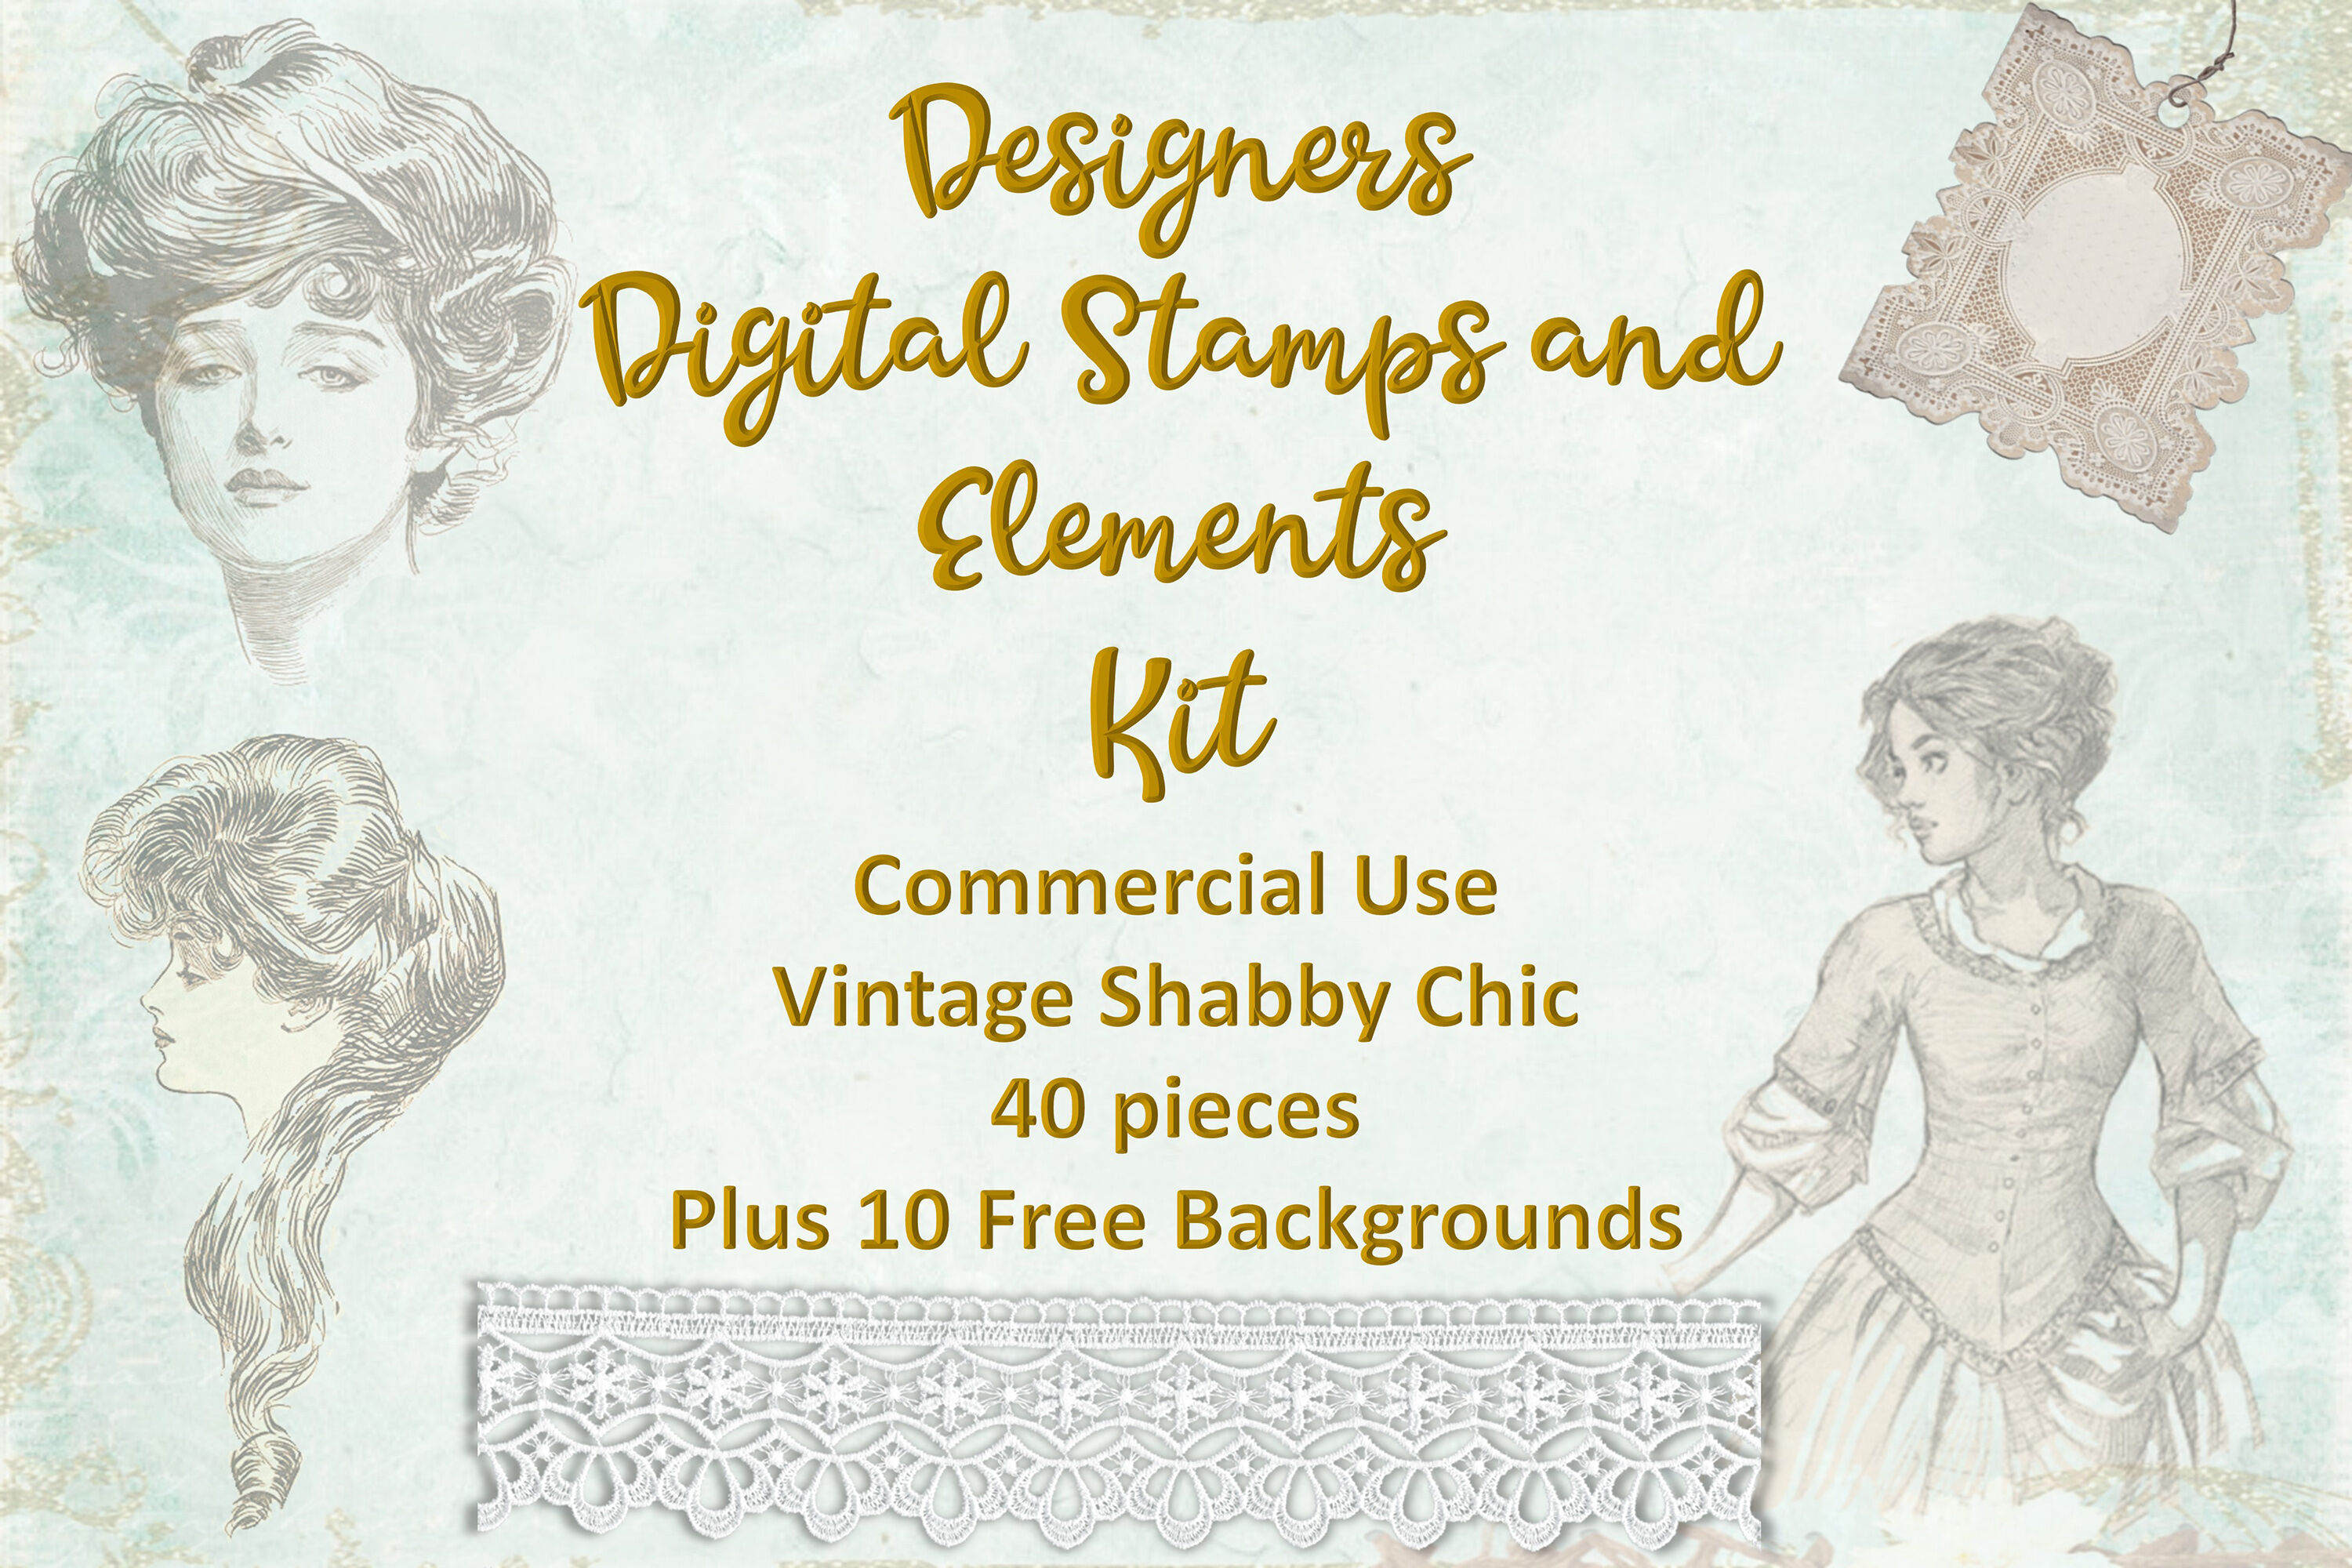 Vintage Digital Stamps Overlays And Ephemera By The Paper